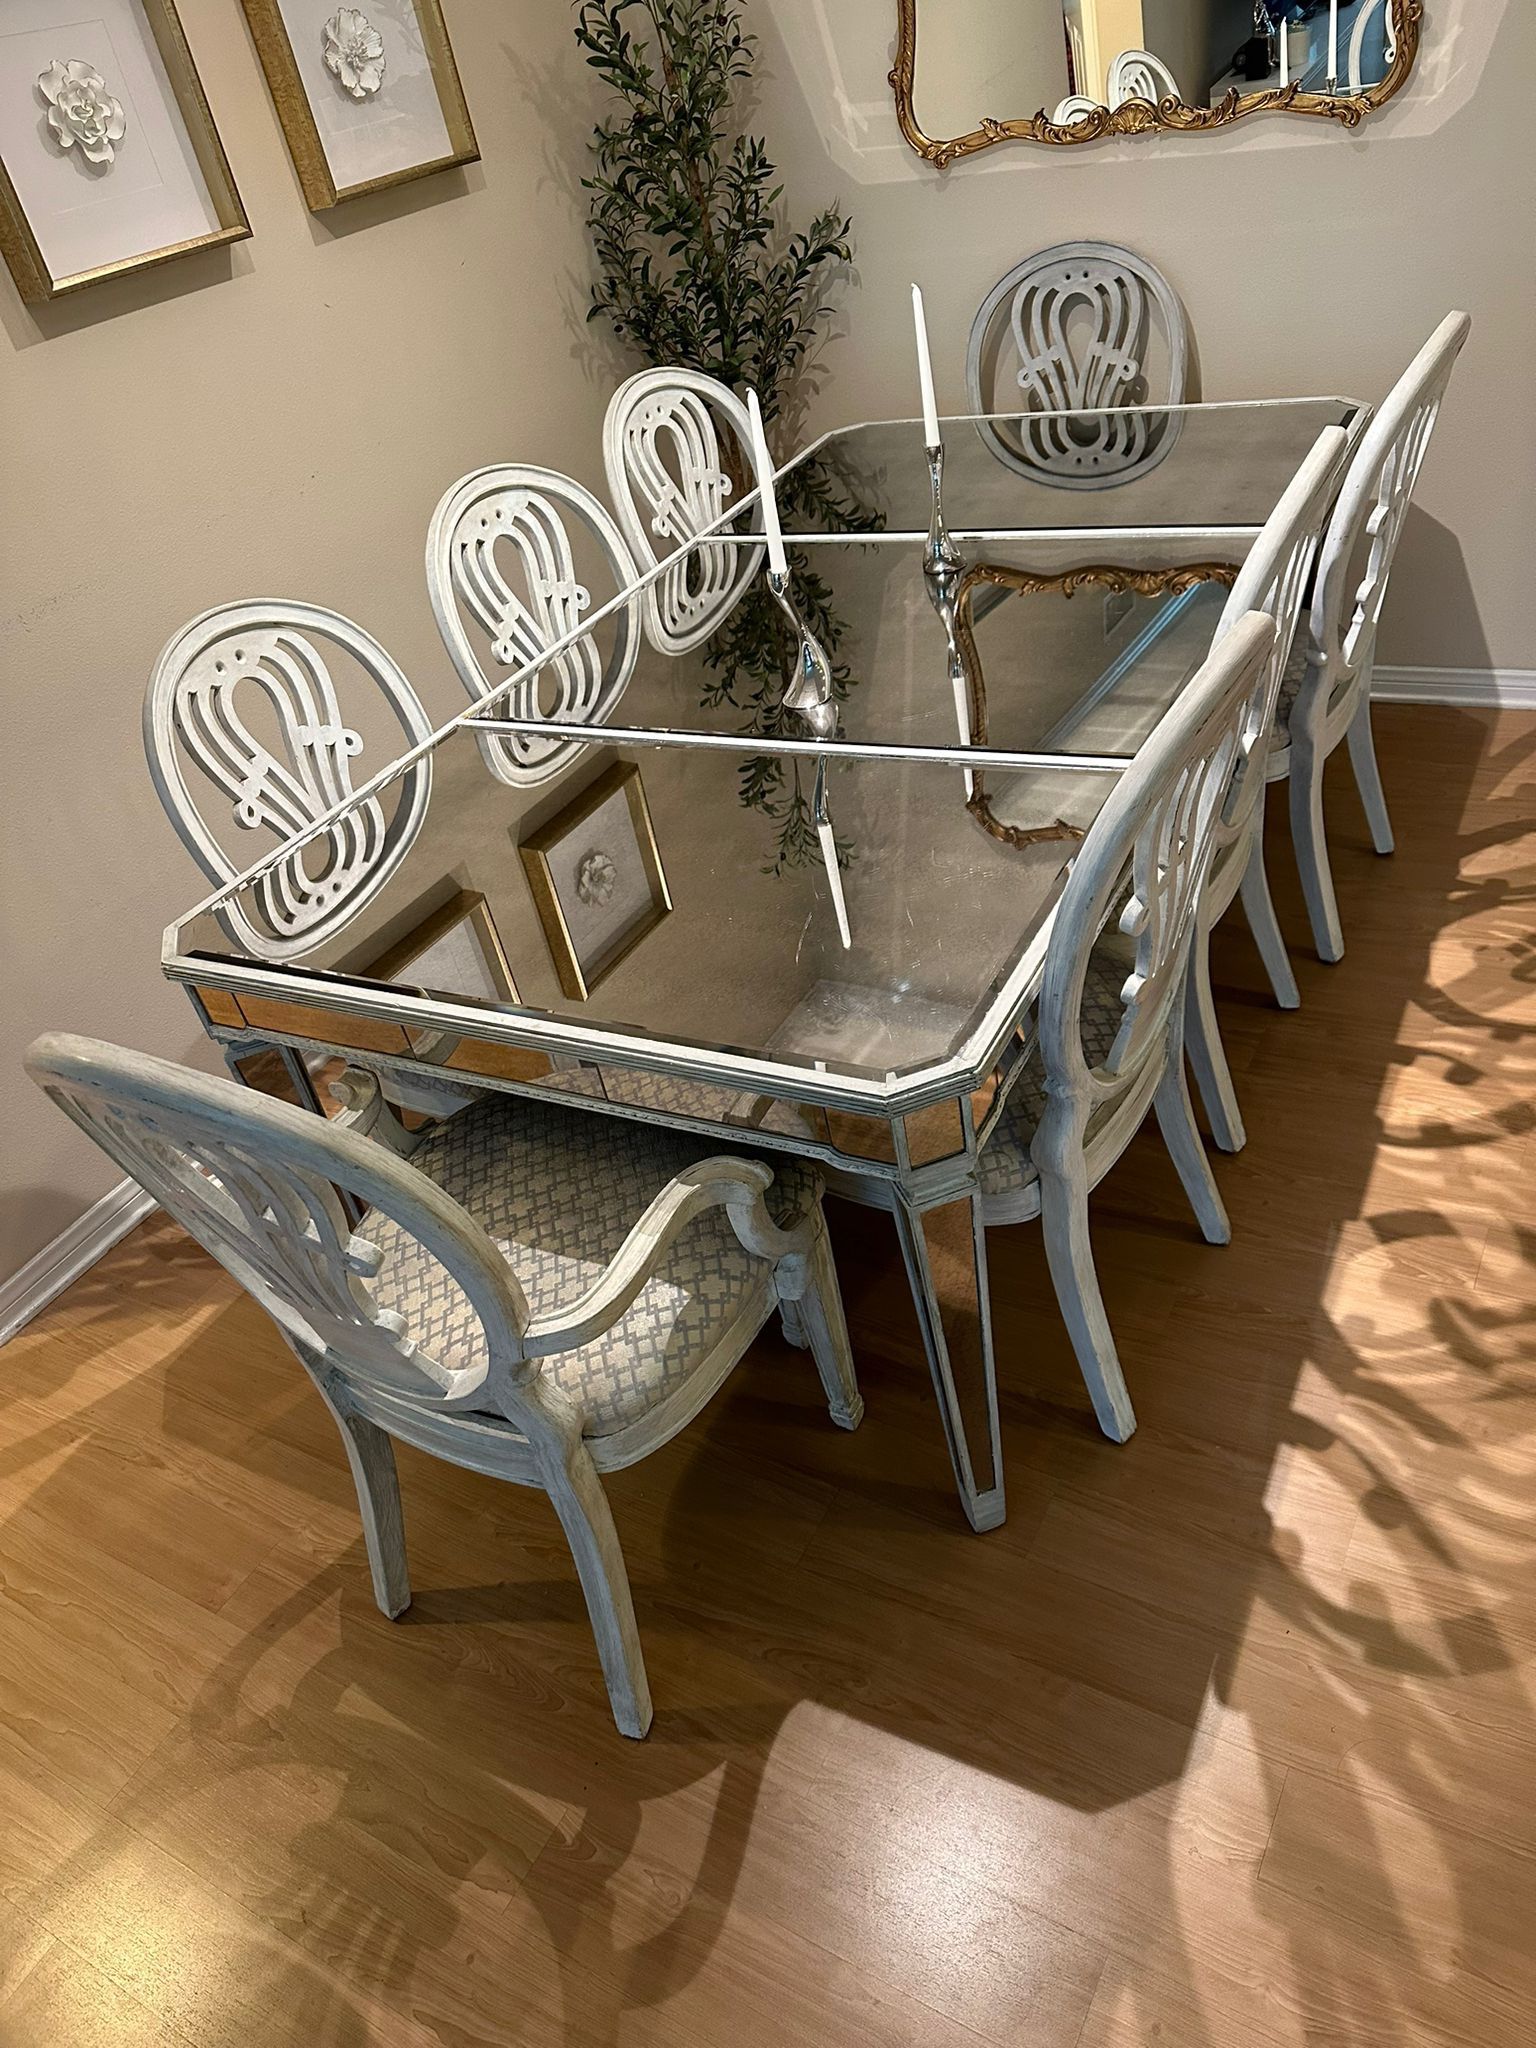 Z Gallery Dinning Table & Chairs